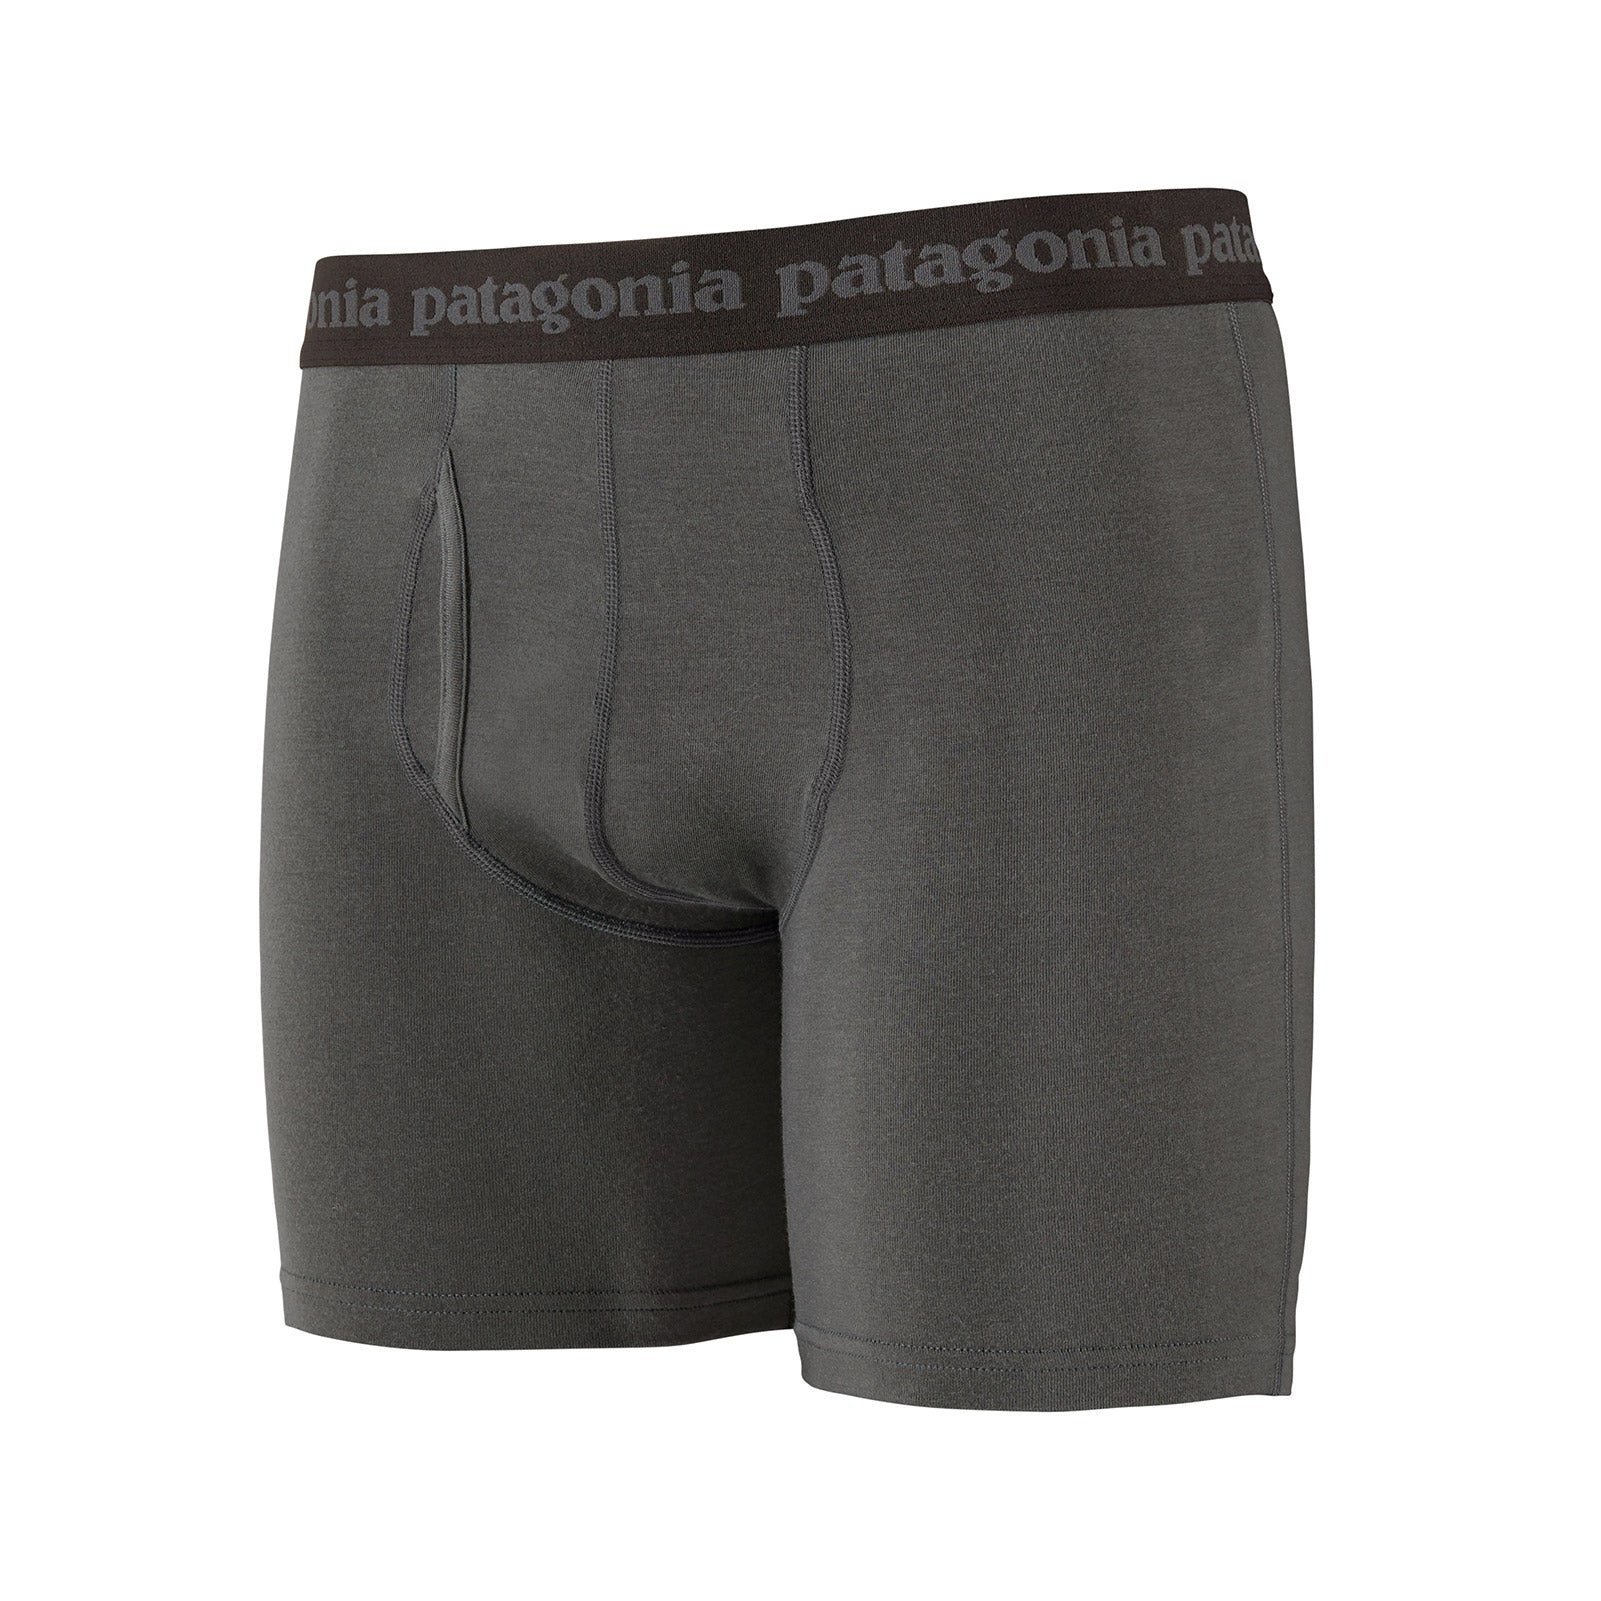 patagonia essential boxer brief 6" in forge grey, front view